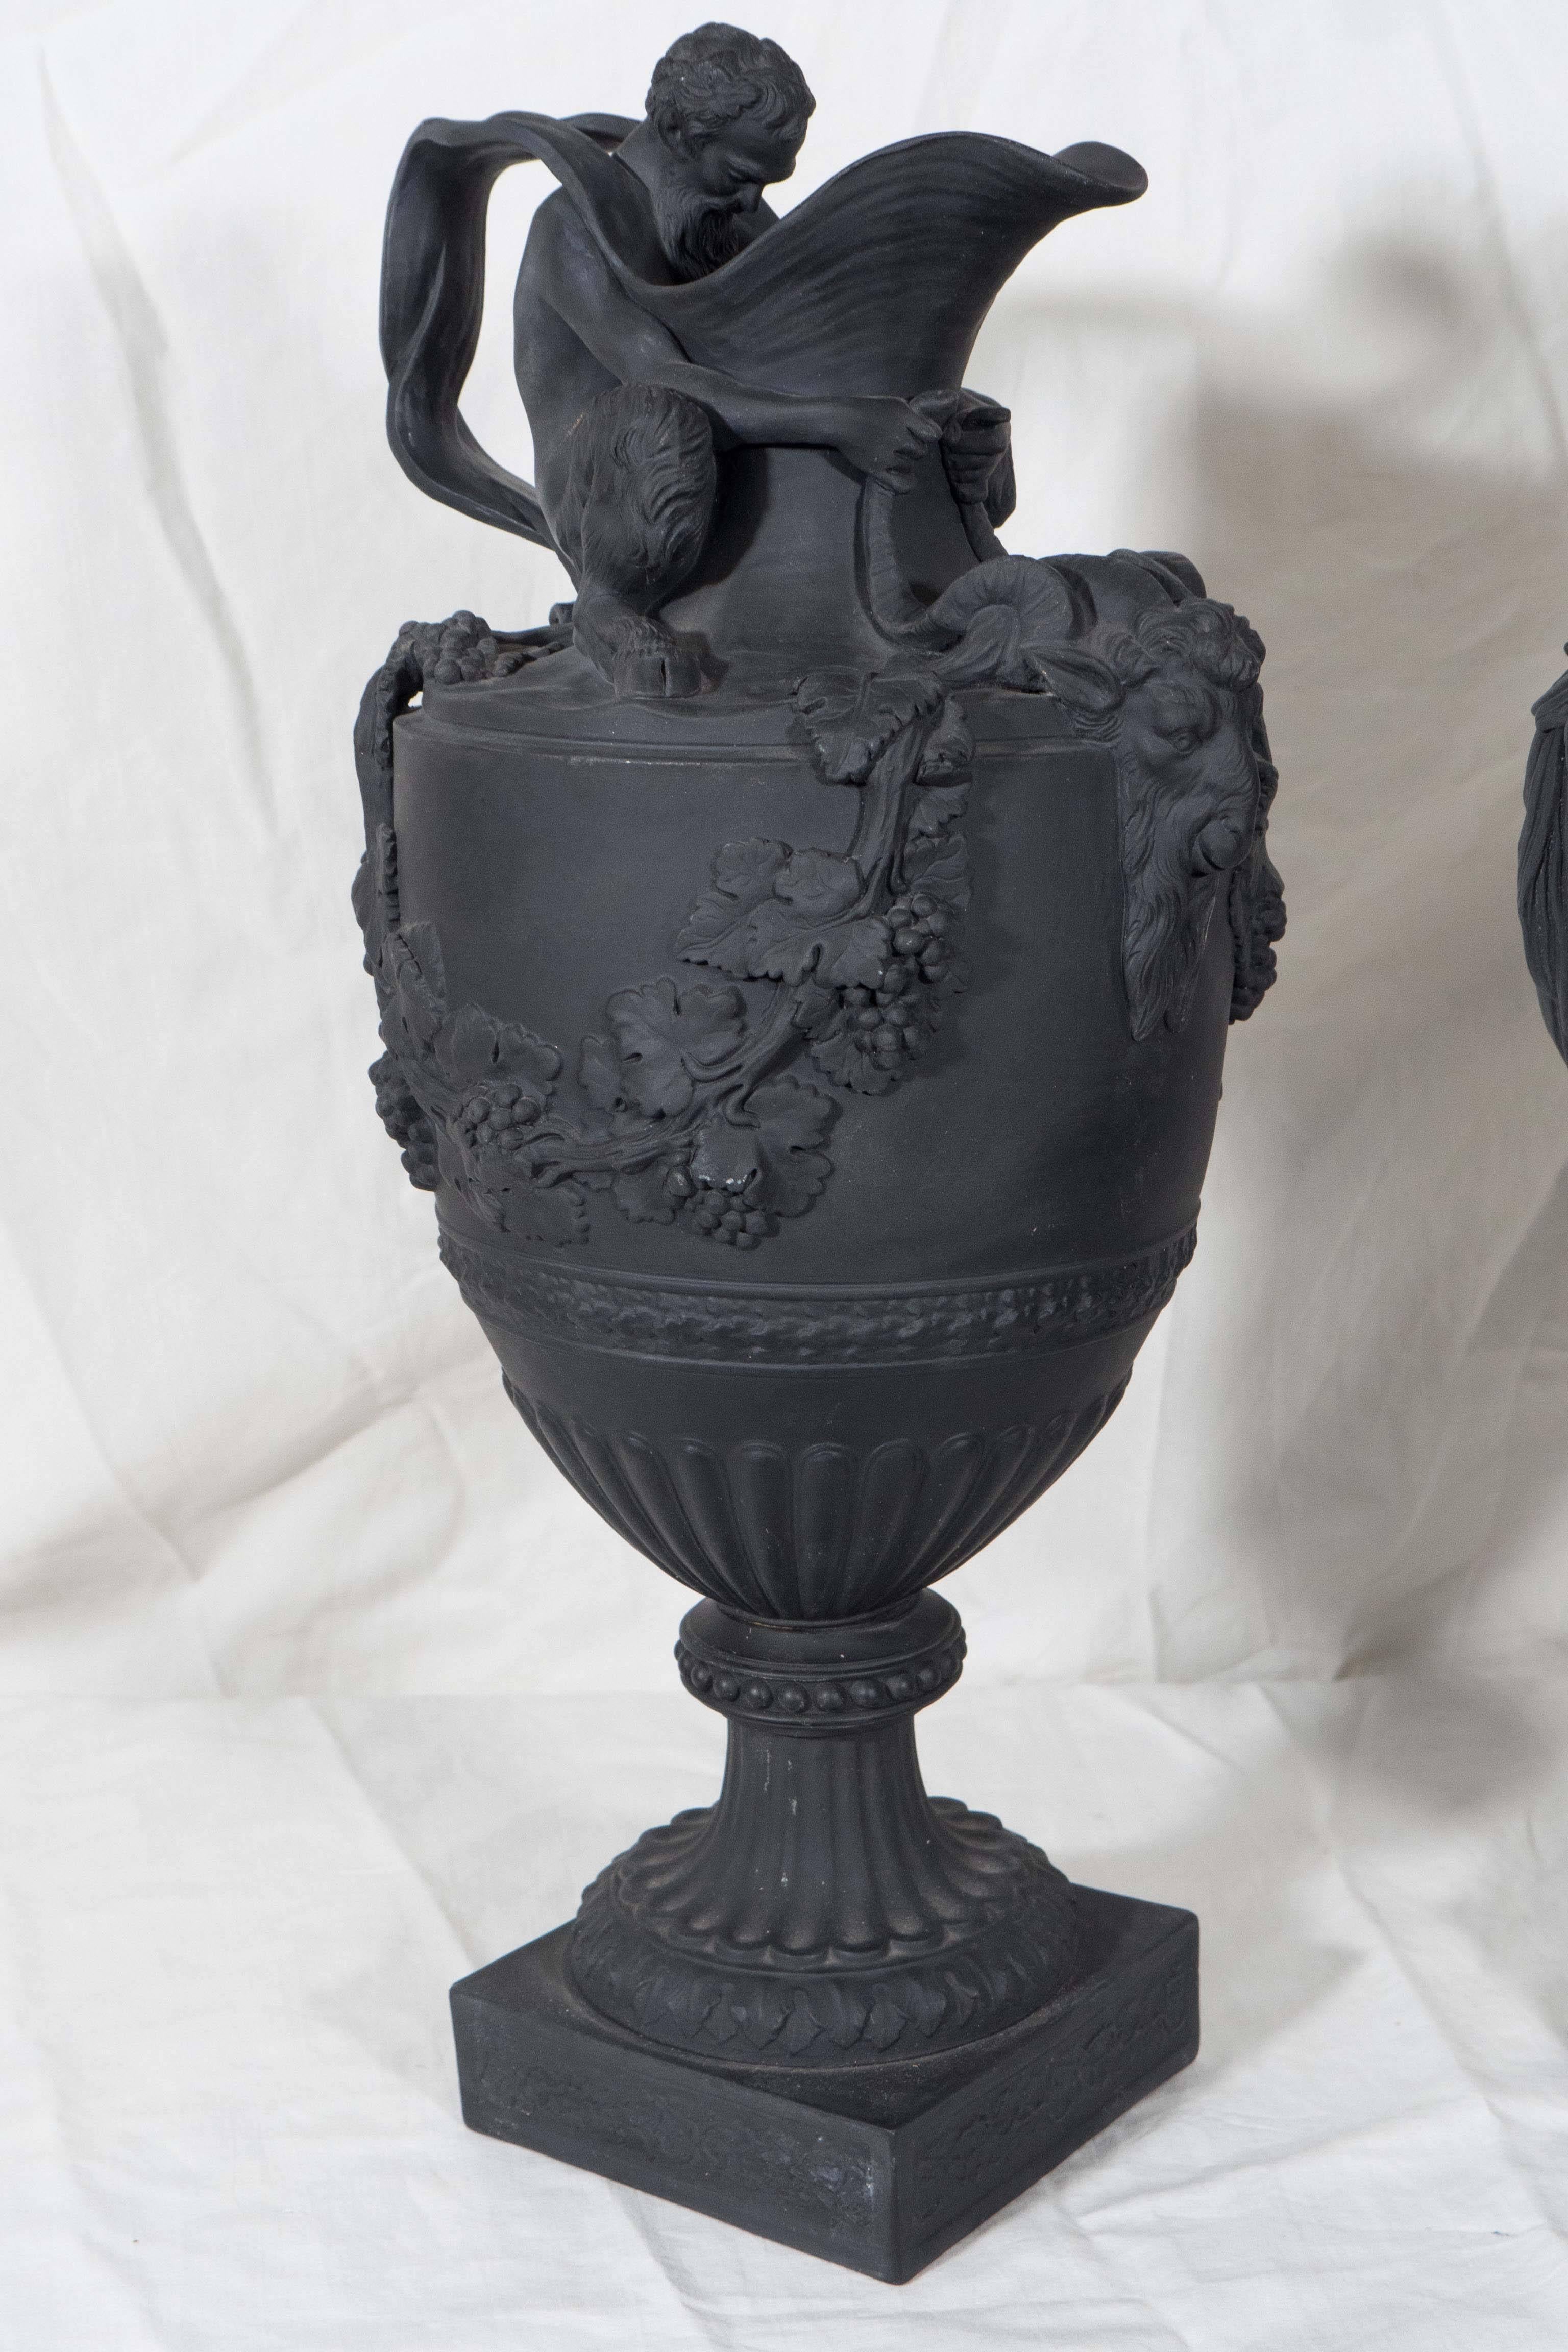 The wine ewer modeled with a figure of Bacchus seated atop the shoulder holding the horns of a ram's head.The water ewer with a figure of Triton seated on the shoulder and holding horns of a marine monster. The wine ewer further decorated with